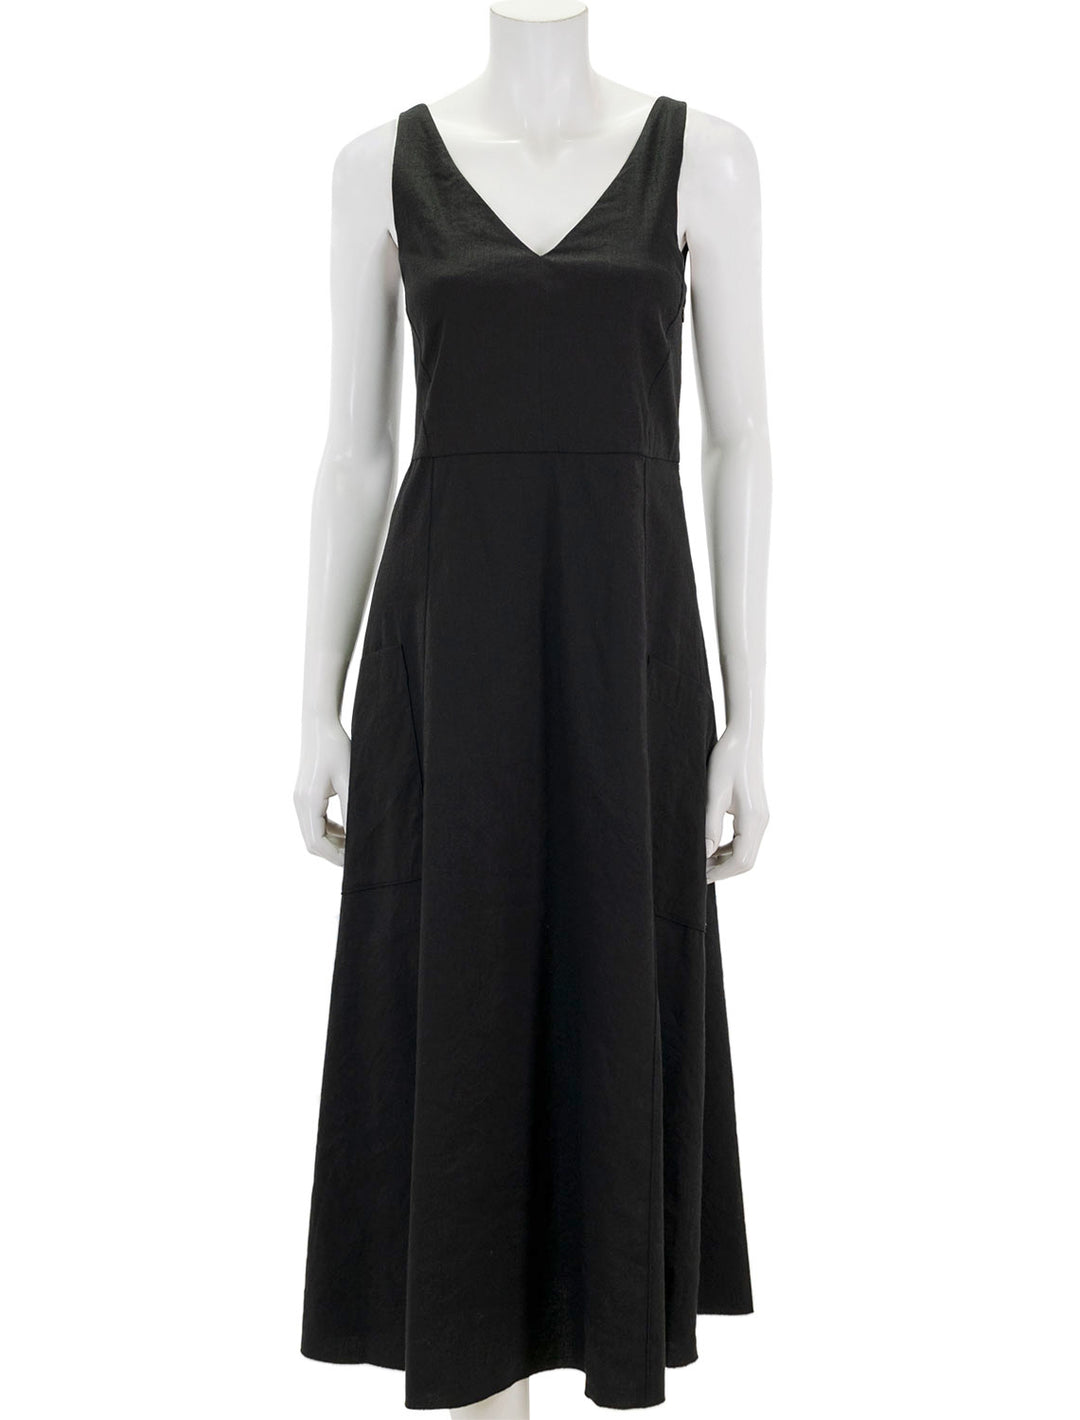 Front view of Vince's relaxed v neck pocketed dress in black.